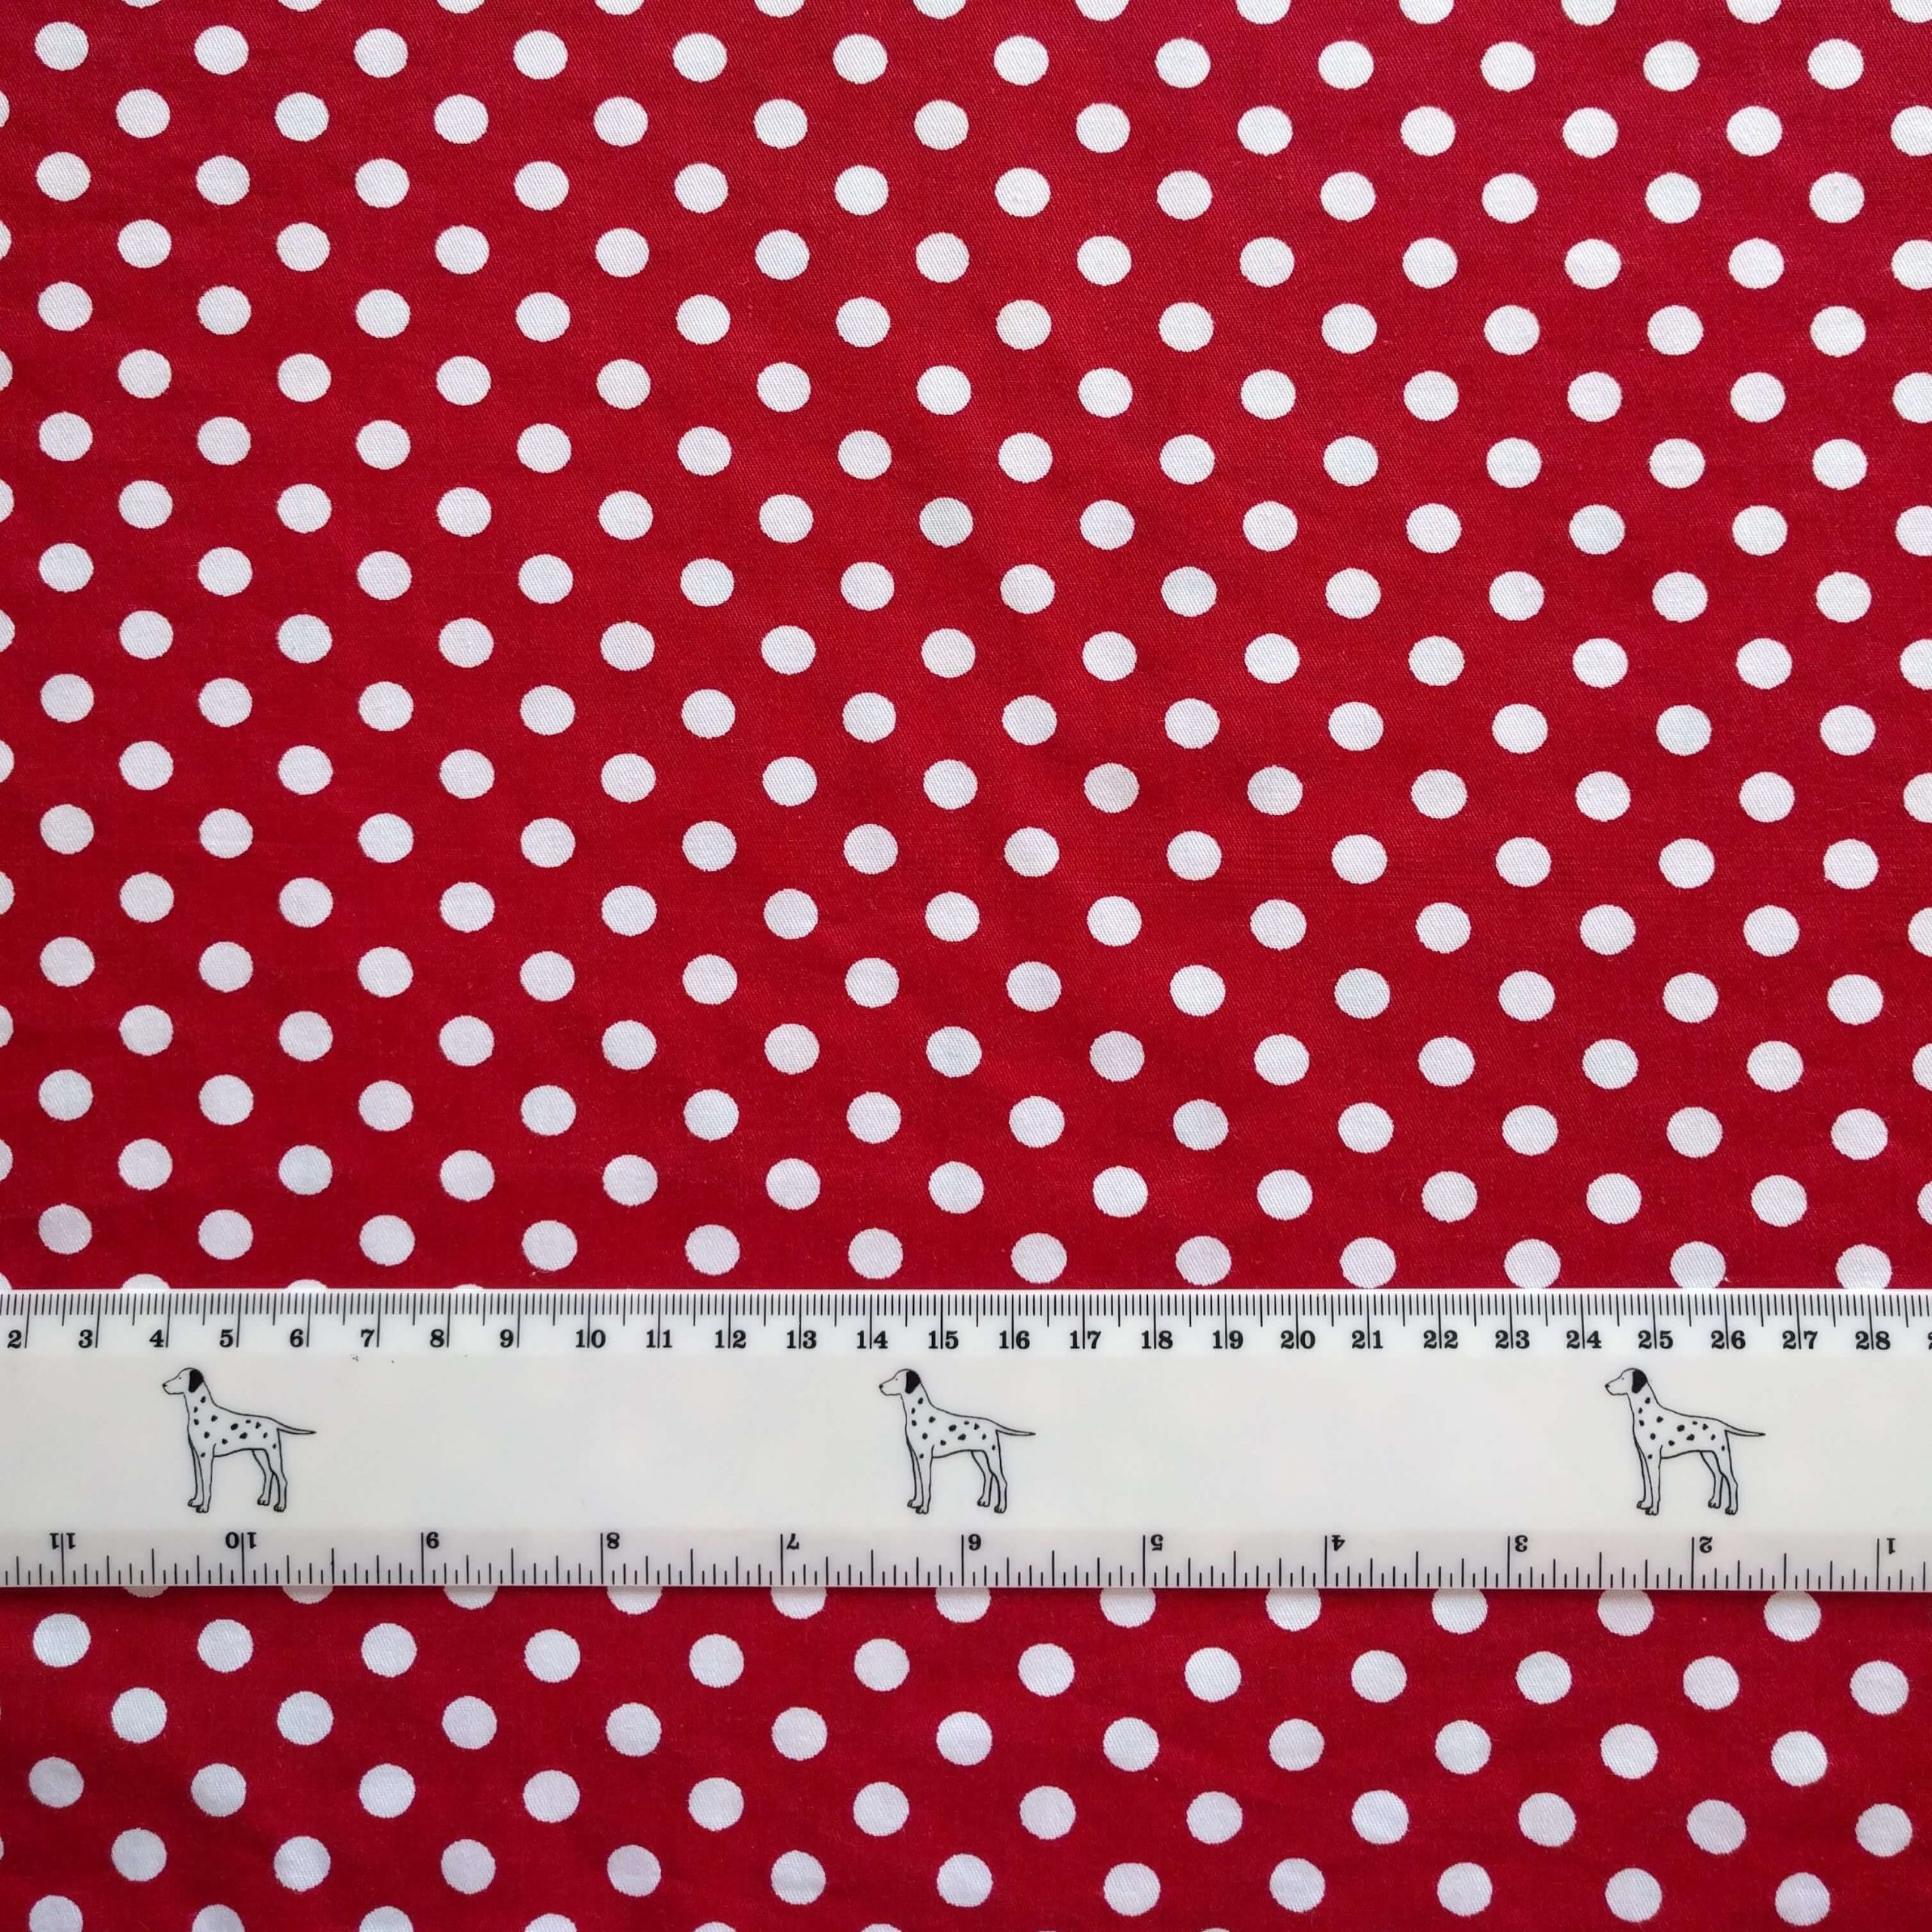 Red with white dots - 100% cotton